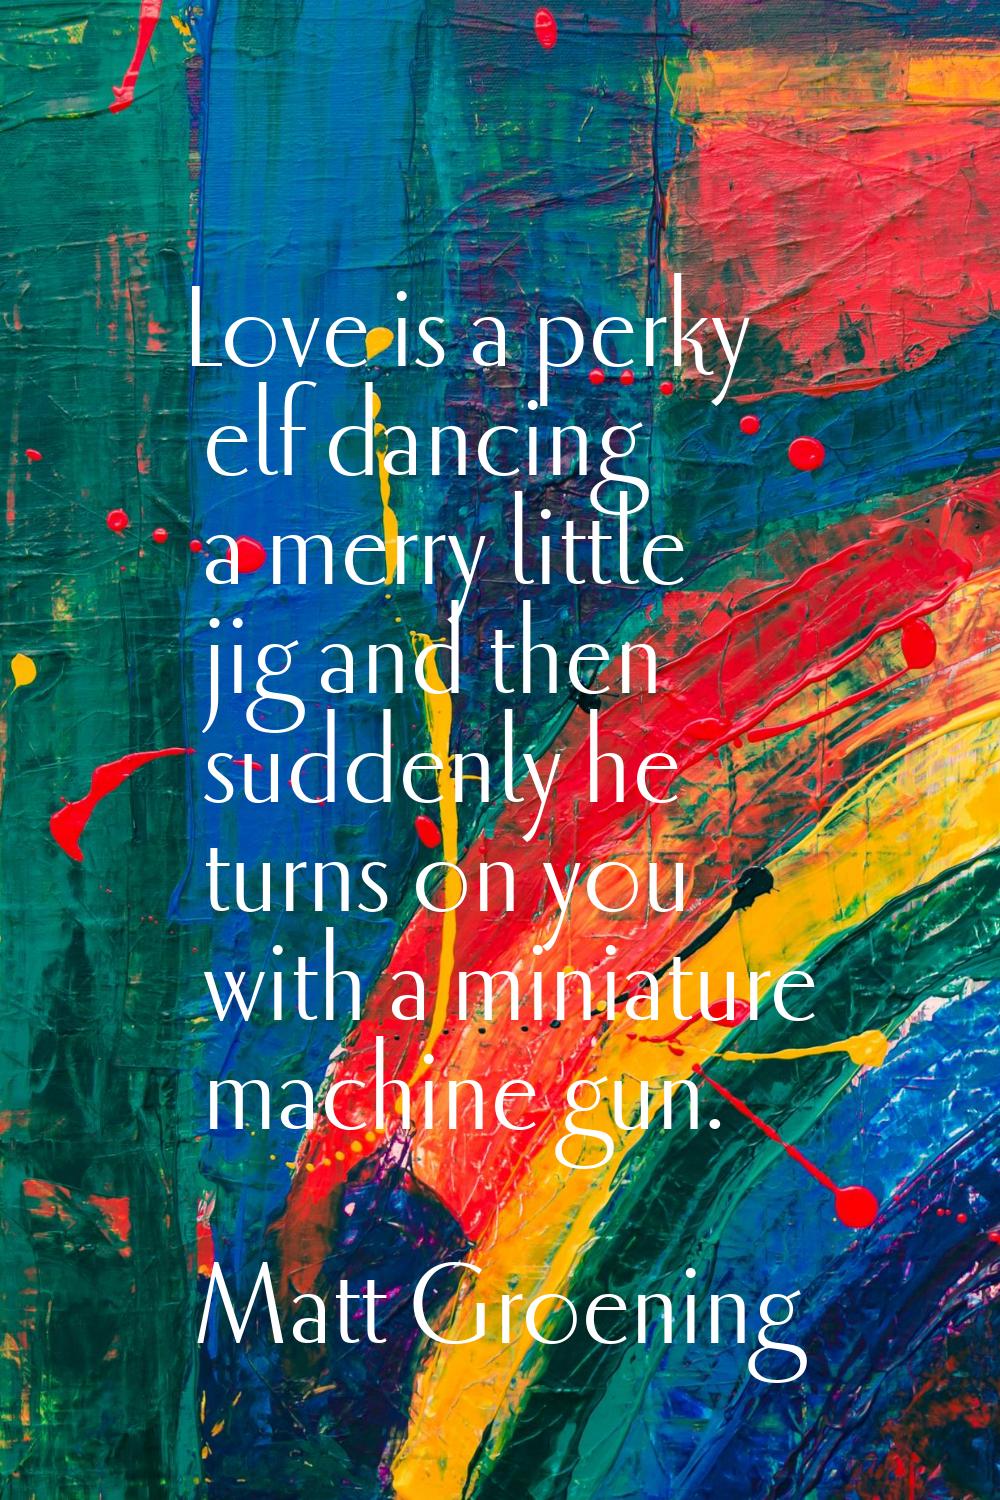 Love is a perky elf dancing a merry little jig and then suddenly he turns on you with a miniature m